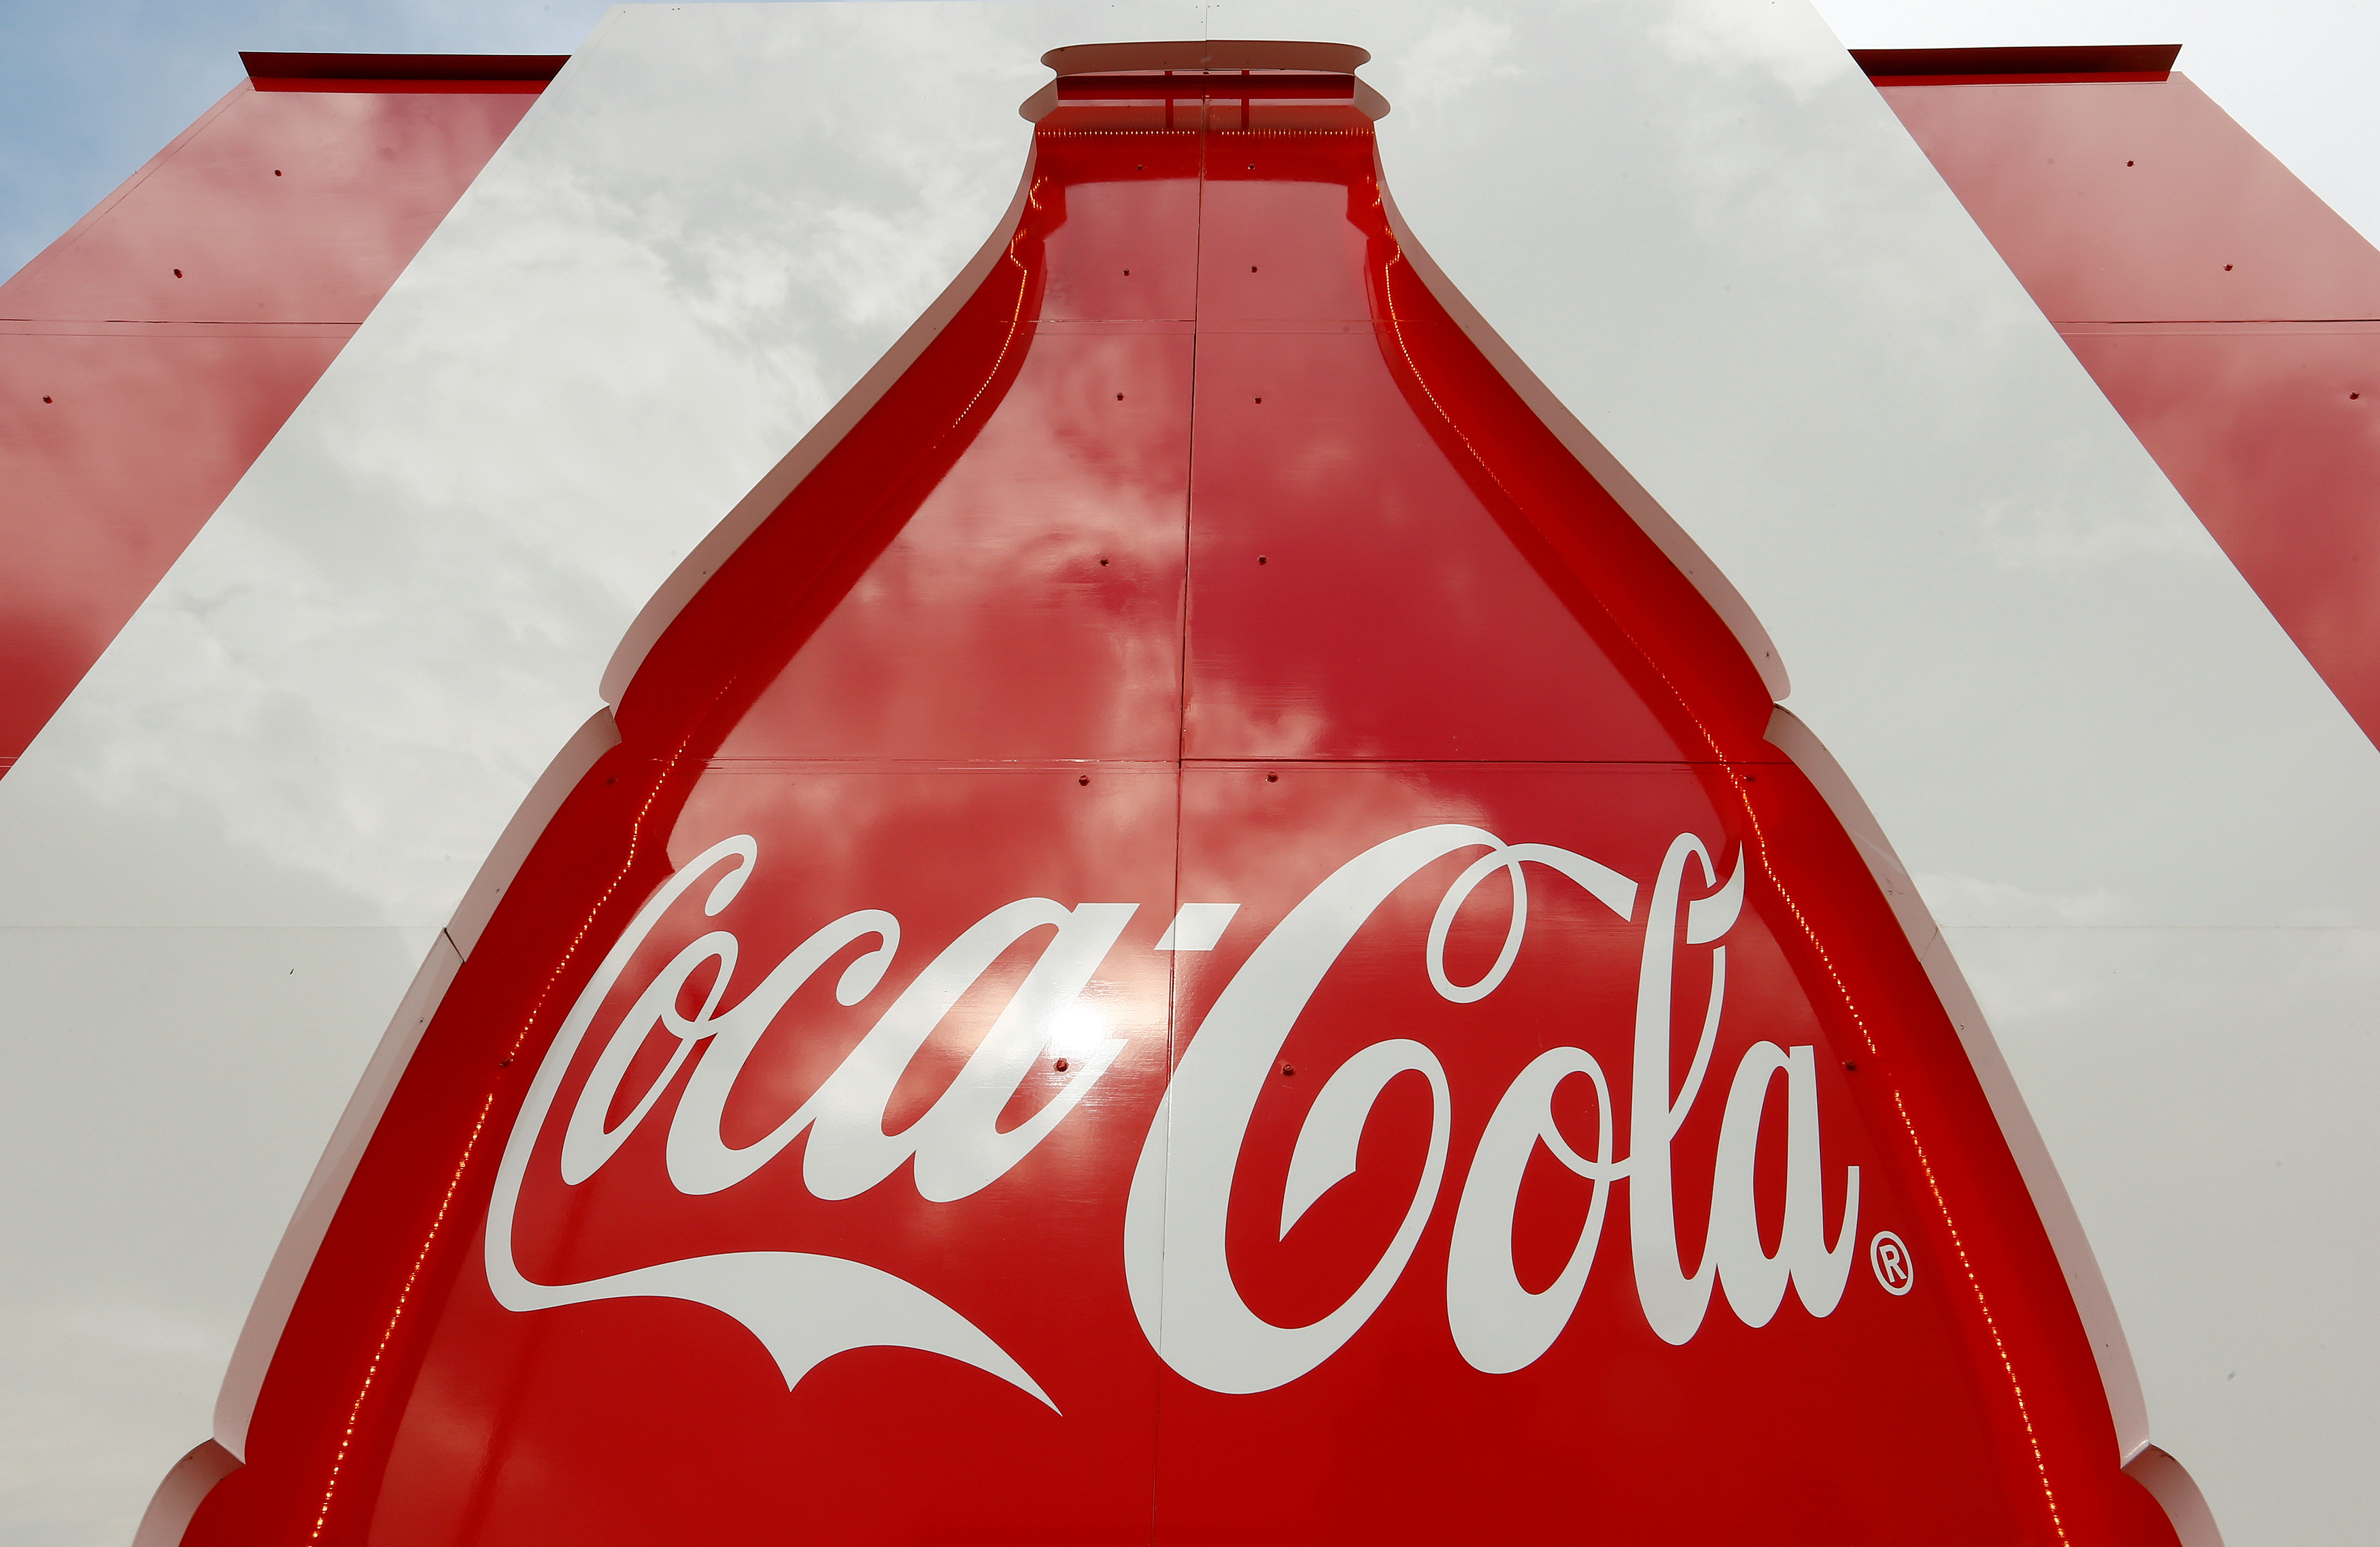 Logo of U.S. beverage group Coca-Cola is seen at a visitors center in Bruettisellen